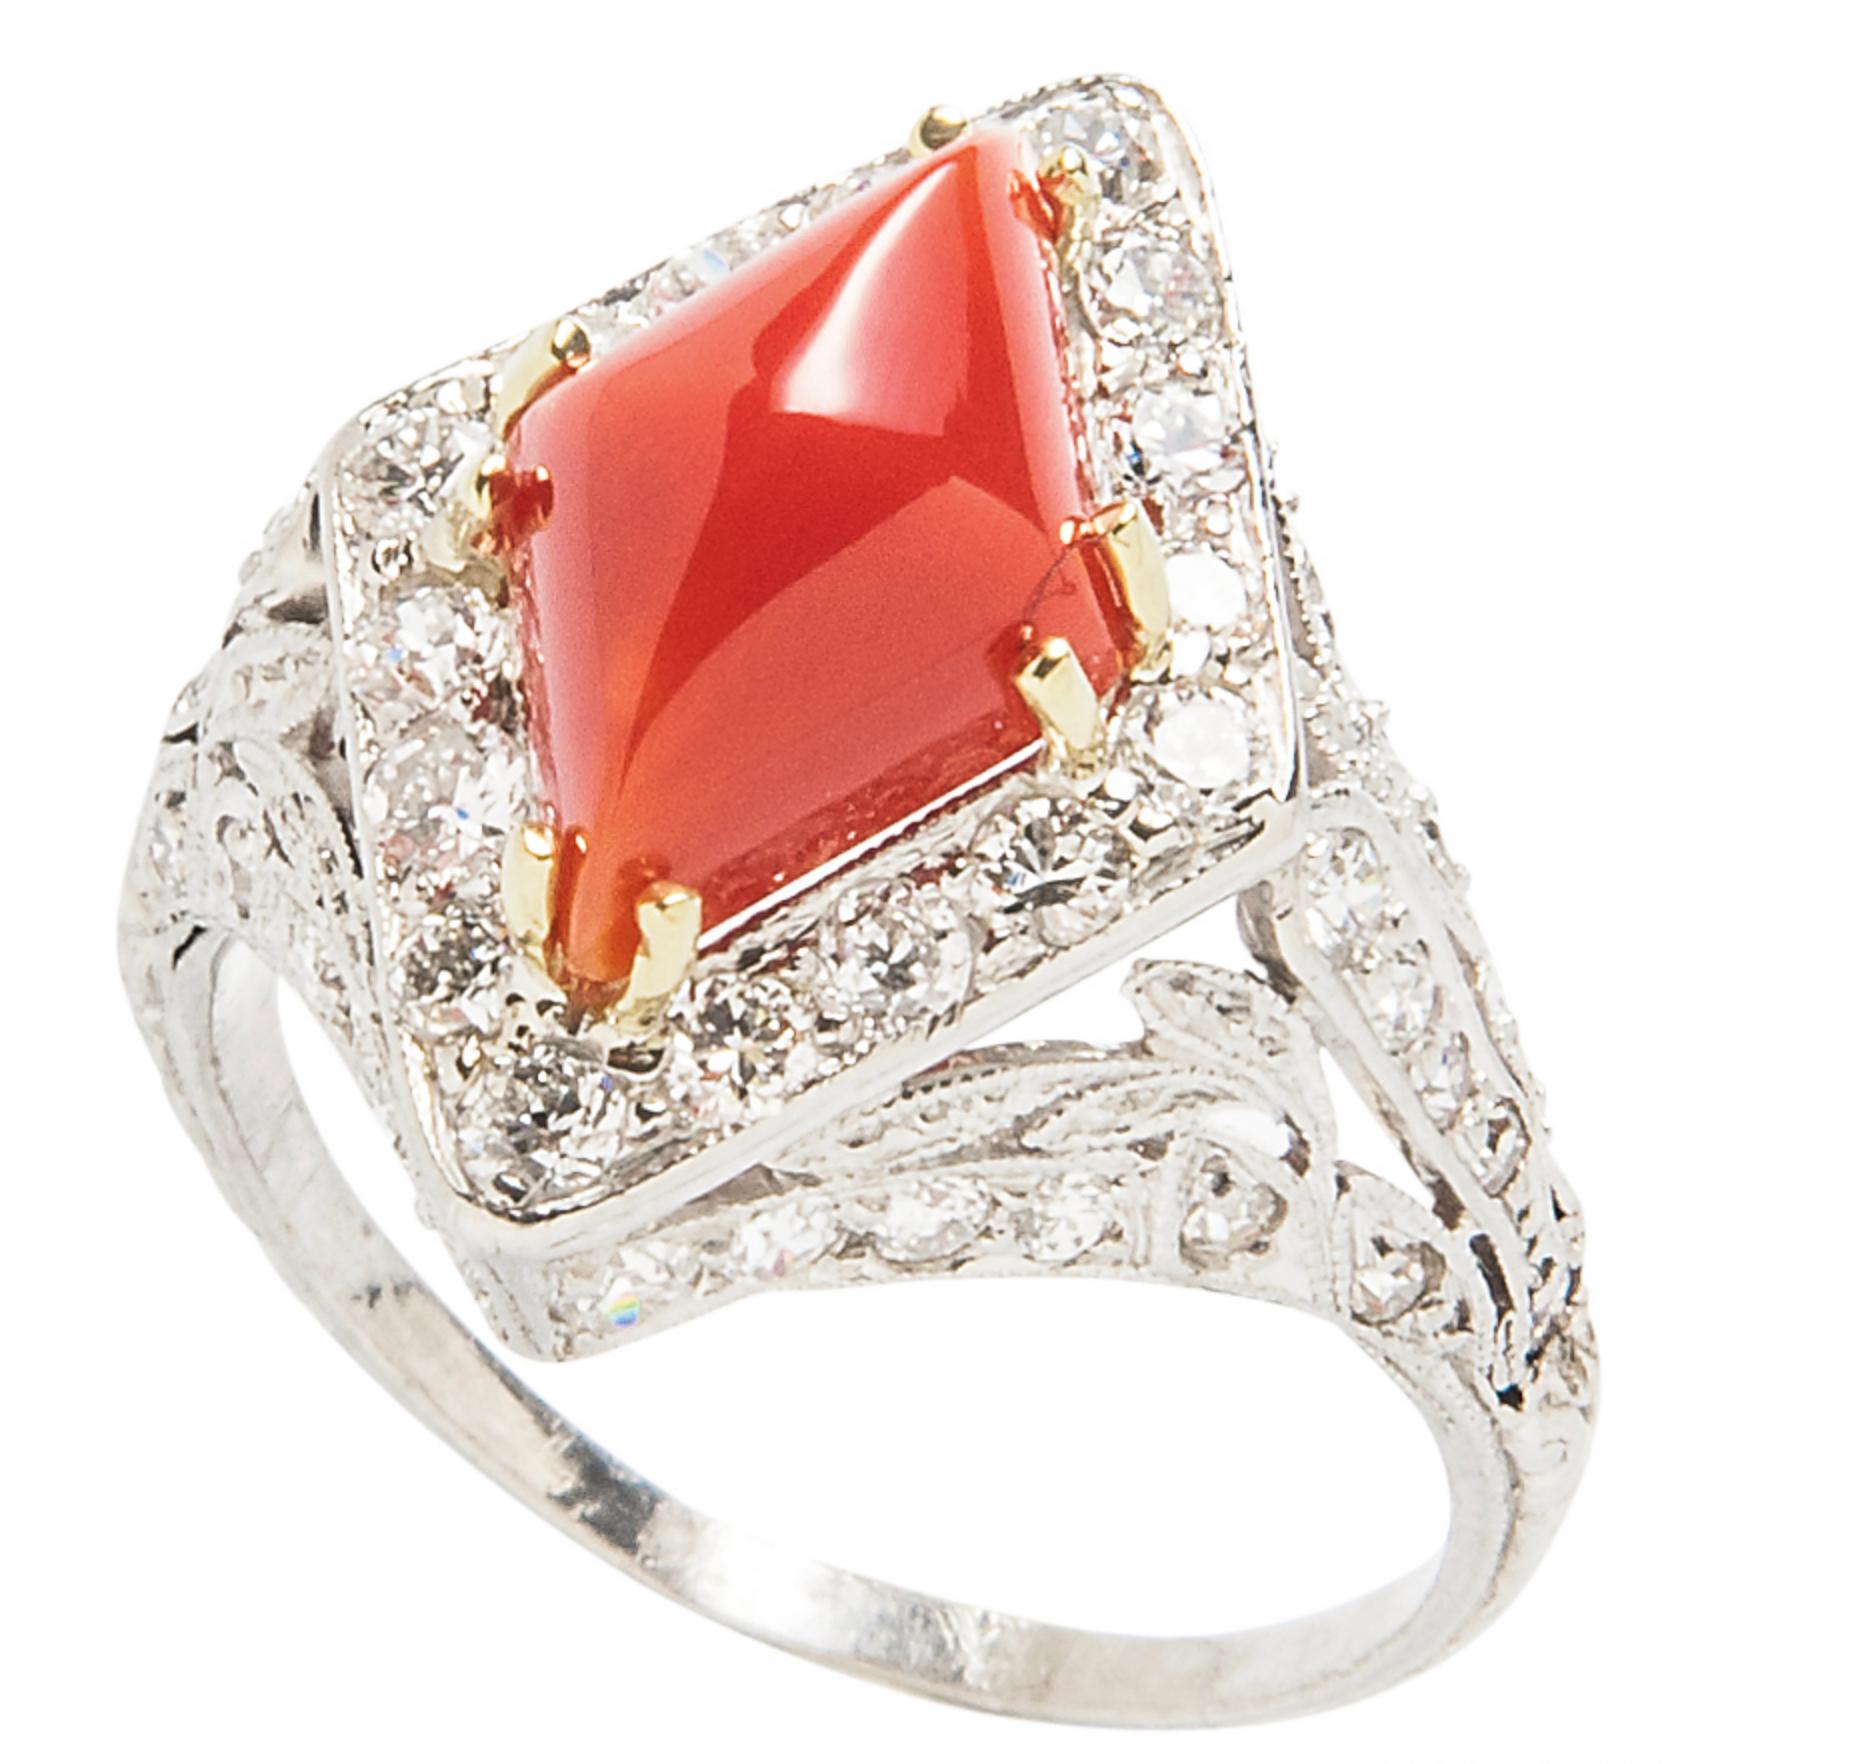 A platinum Art Deco ring featuring Oxblood Coral Navette Cabochon surrounded by Old European, Full Cut and Single Cut Diamonds approximately 1.25-1.50 carats.  Size 7.